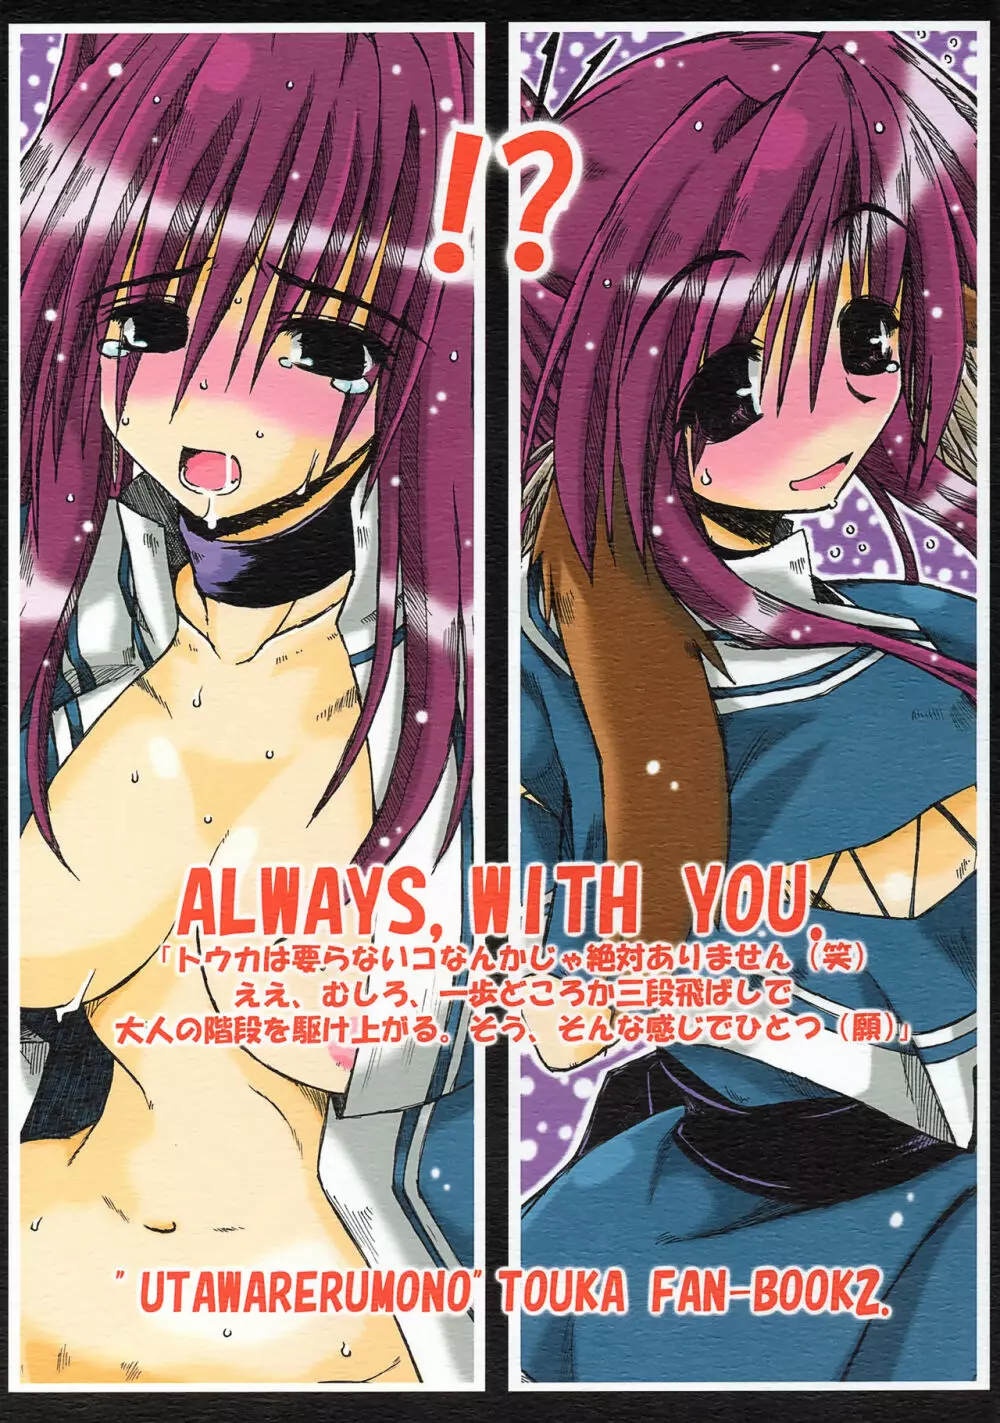 ALWAYS, WITH YOU. - page1